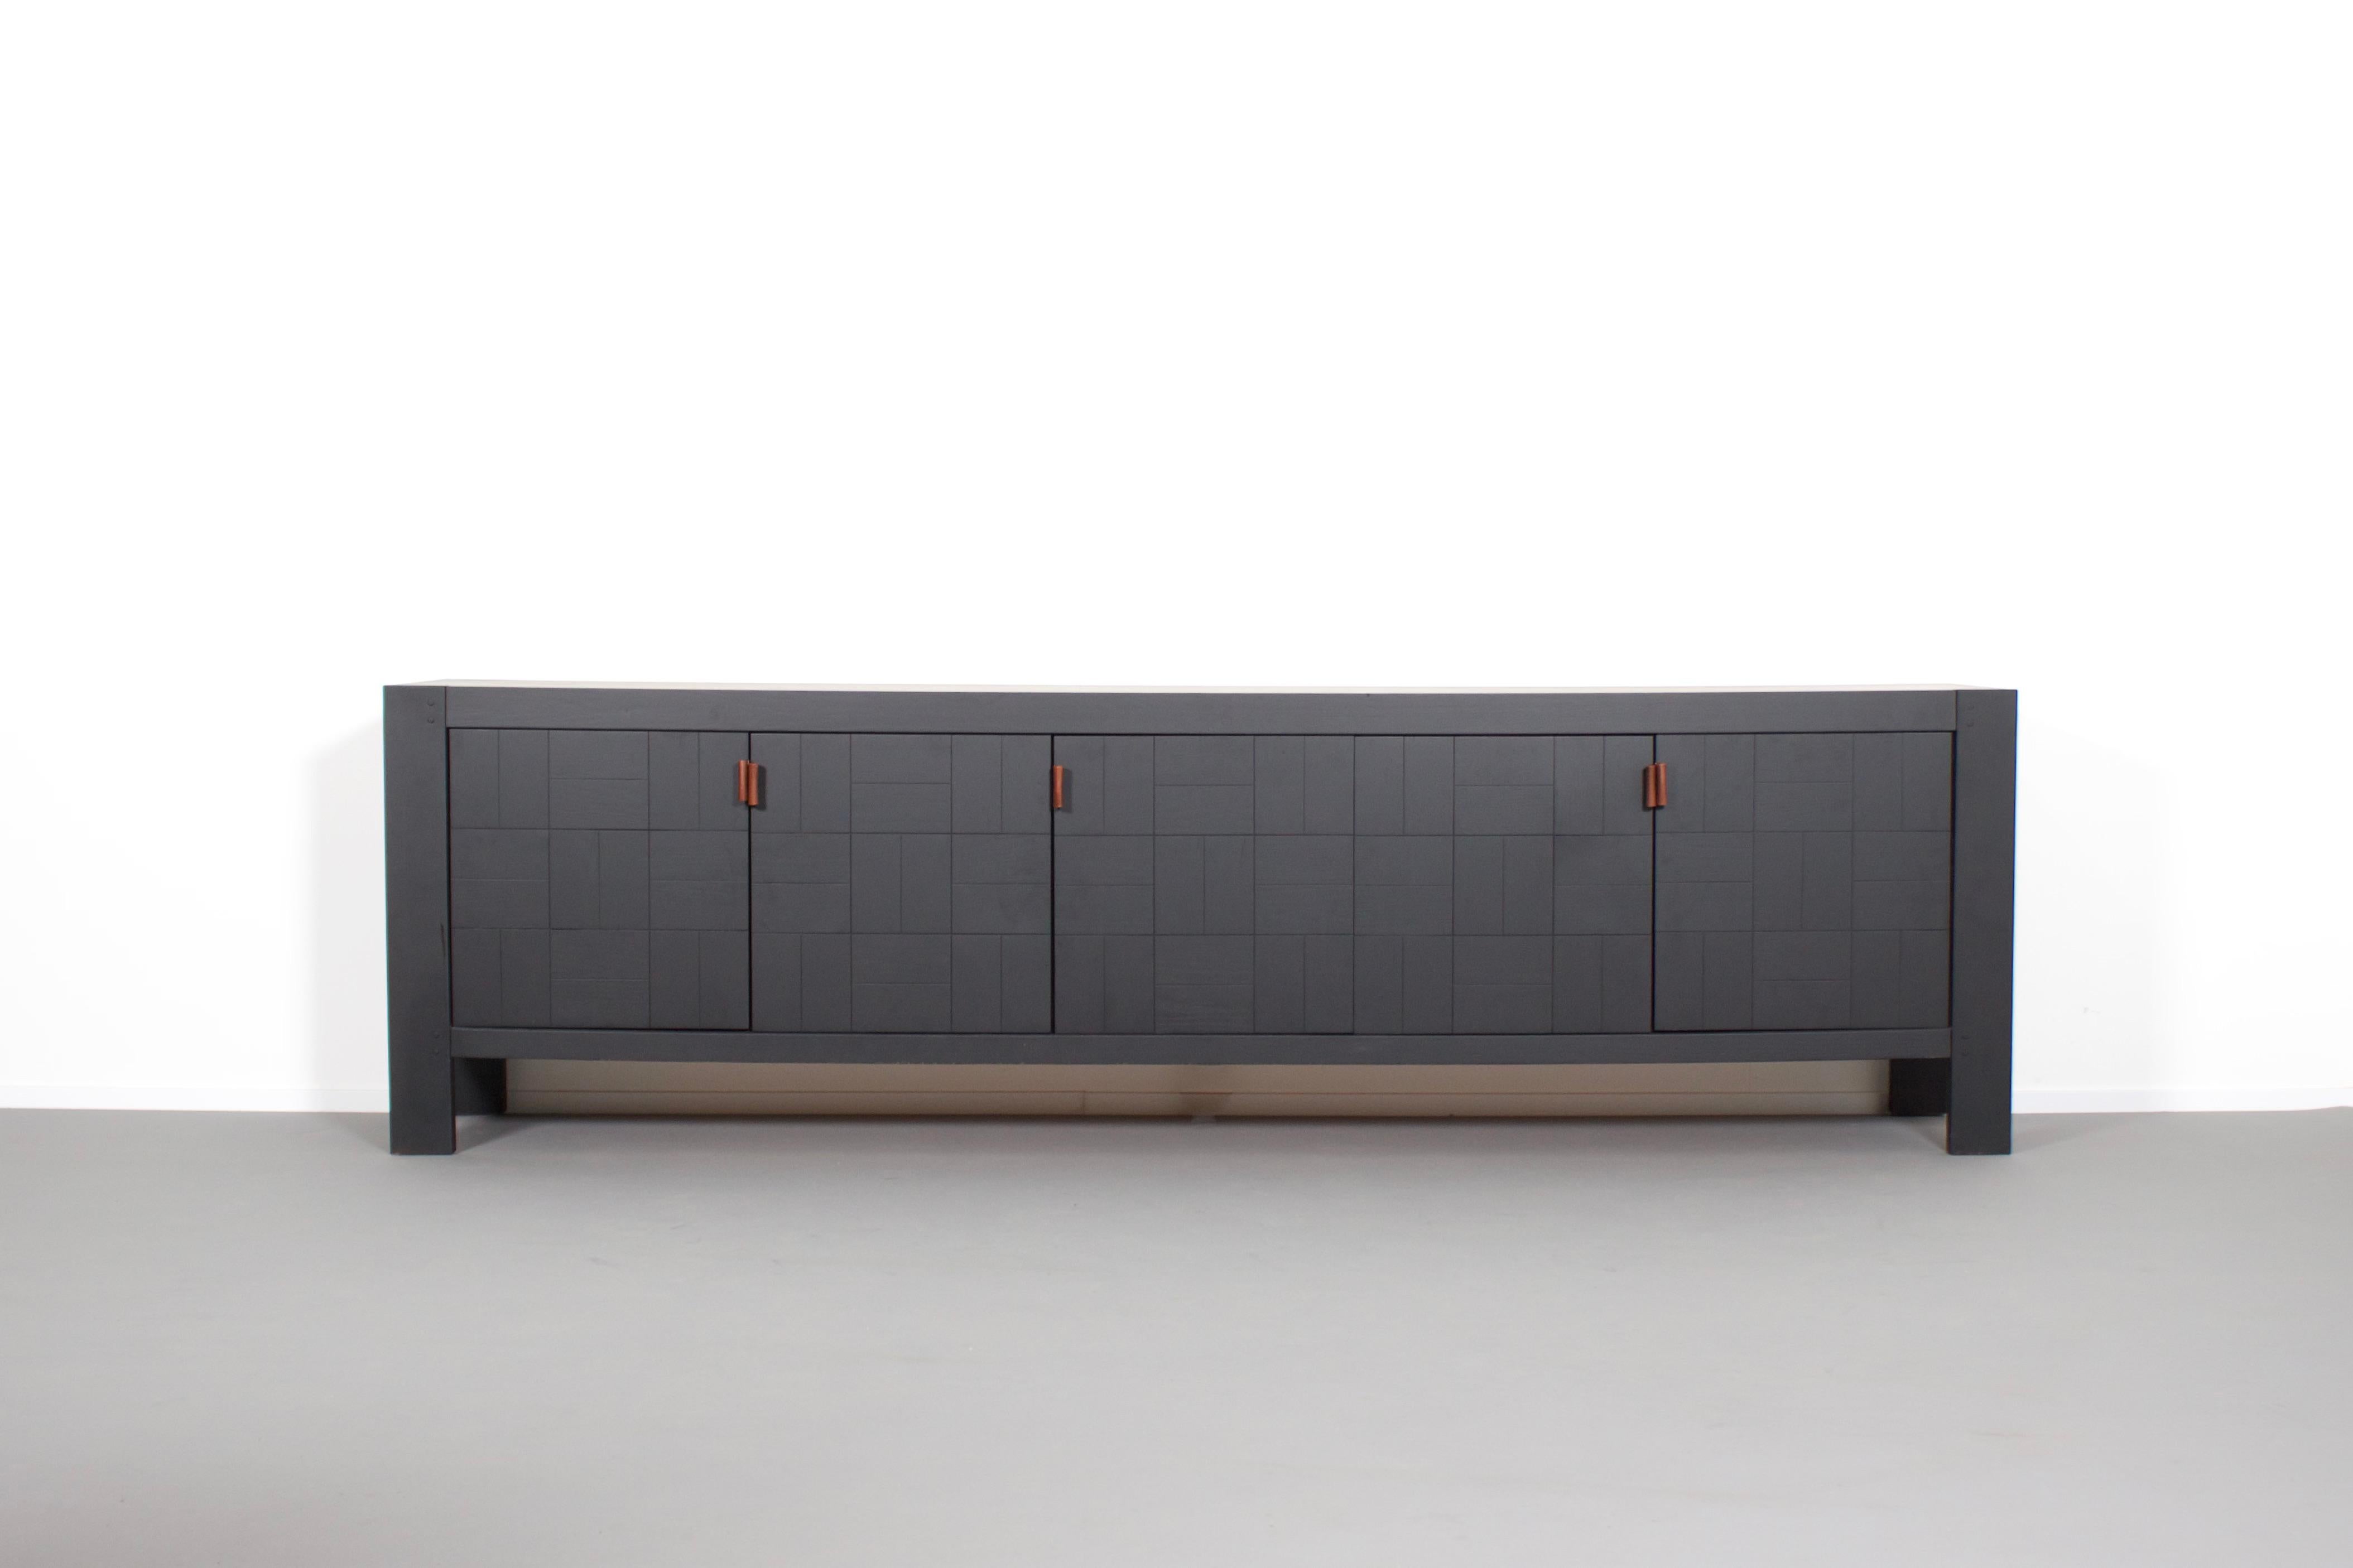 Impressive Brutalist sideboard in very good condition.

Made in Belgium in the 1970s. 

The sideboard is executed in black oak.

The graphic doors are finished in a way that a patchwork is created with a combination of horizontal and vertical